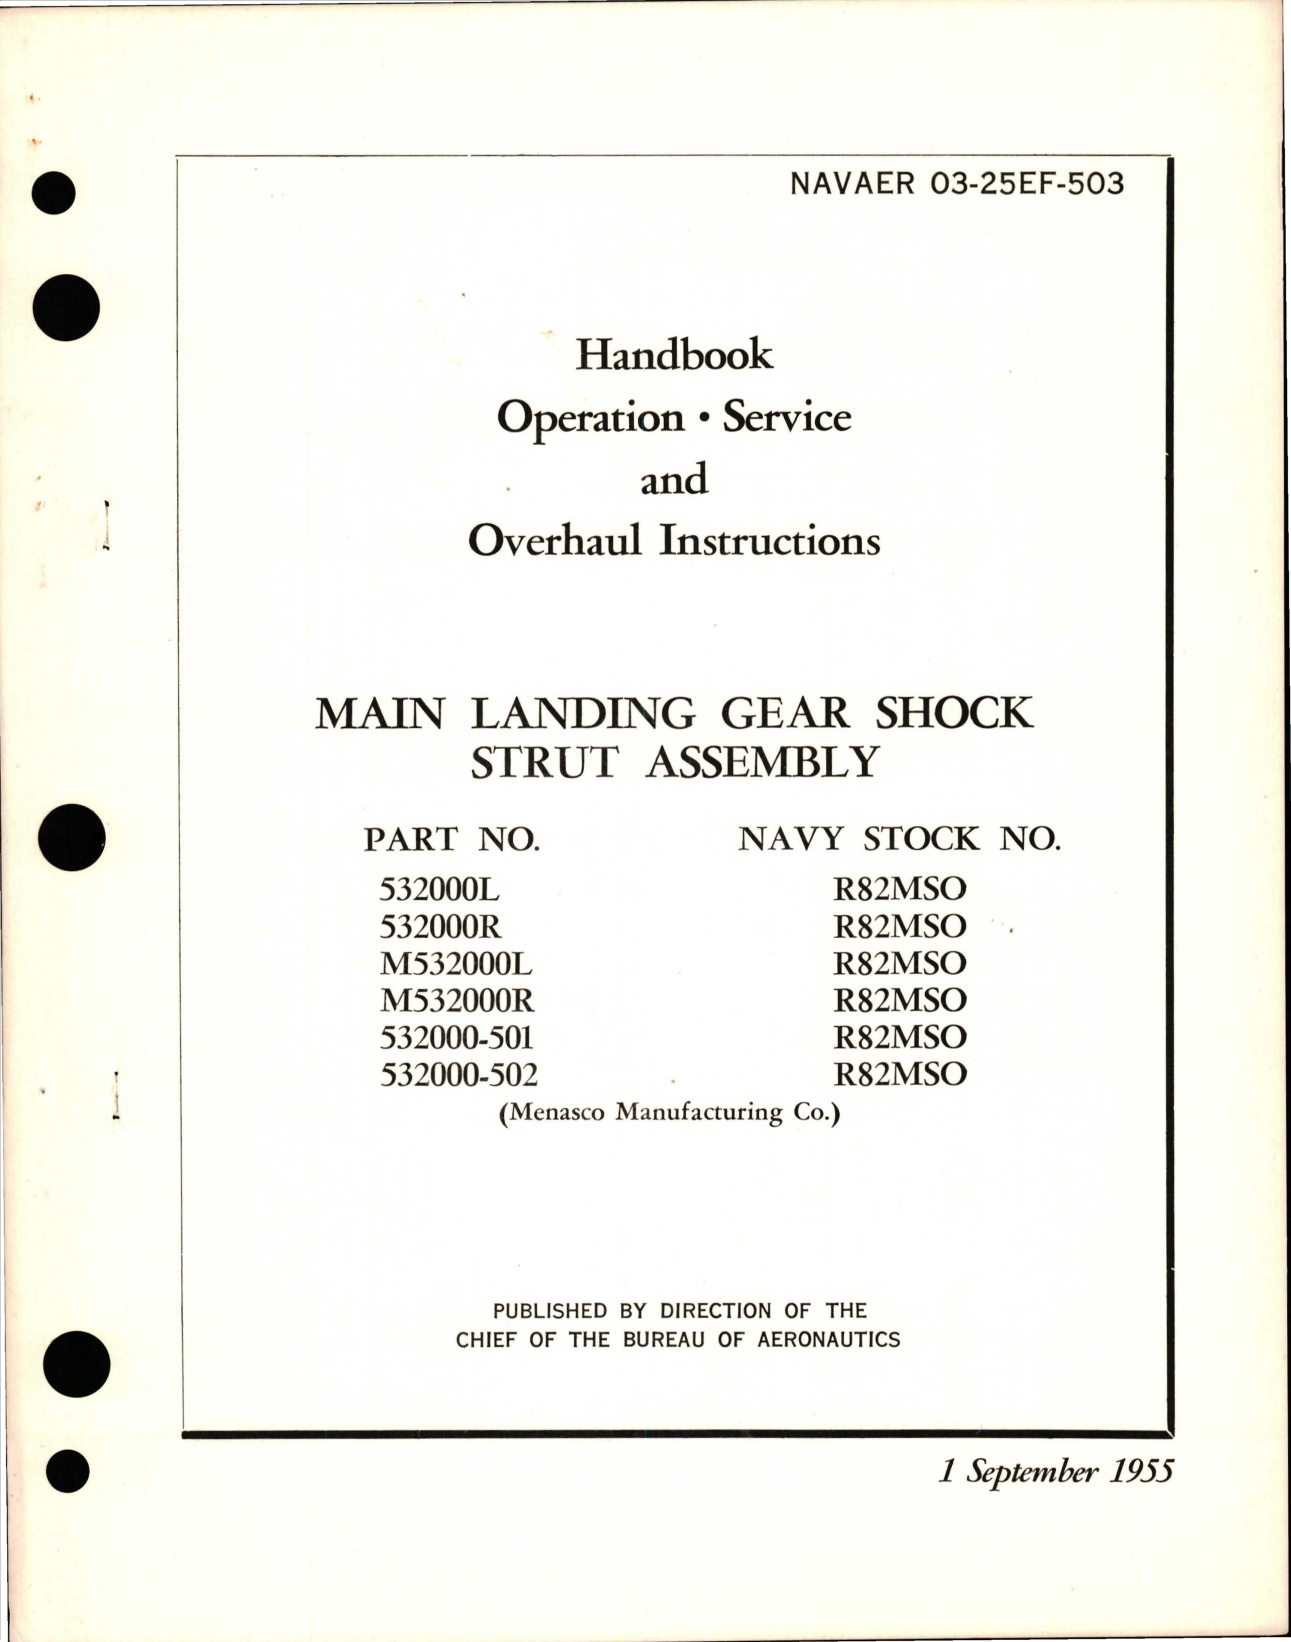 Sample page 1 from AirCorps Library document: Operation, Service and Overhaul Instructions for Main Landing Gear Shock Strut Assembly 